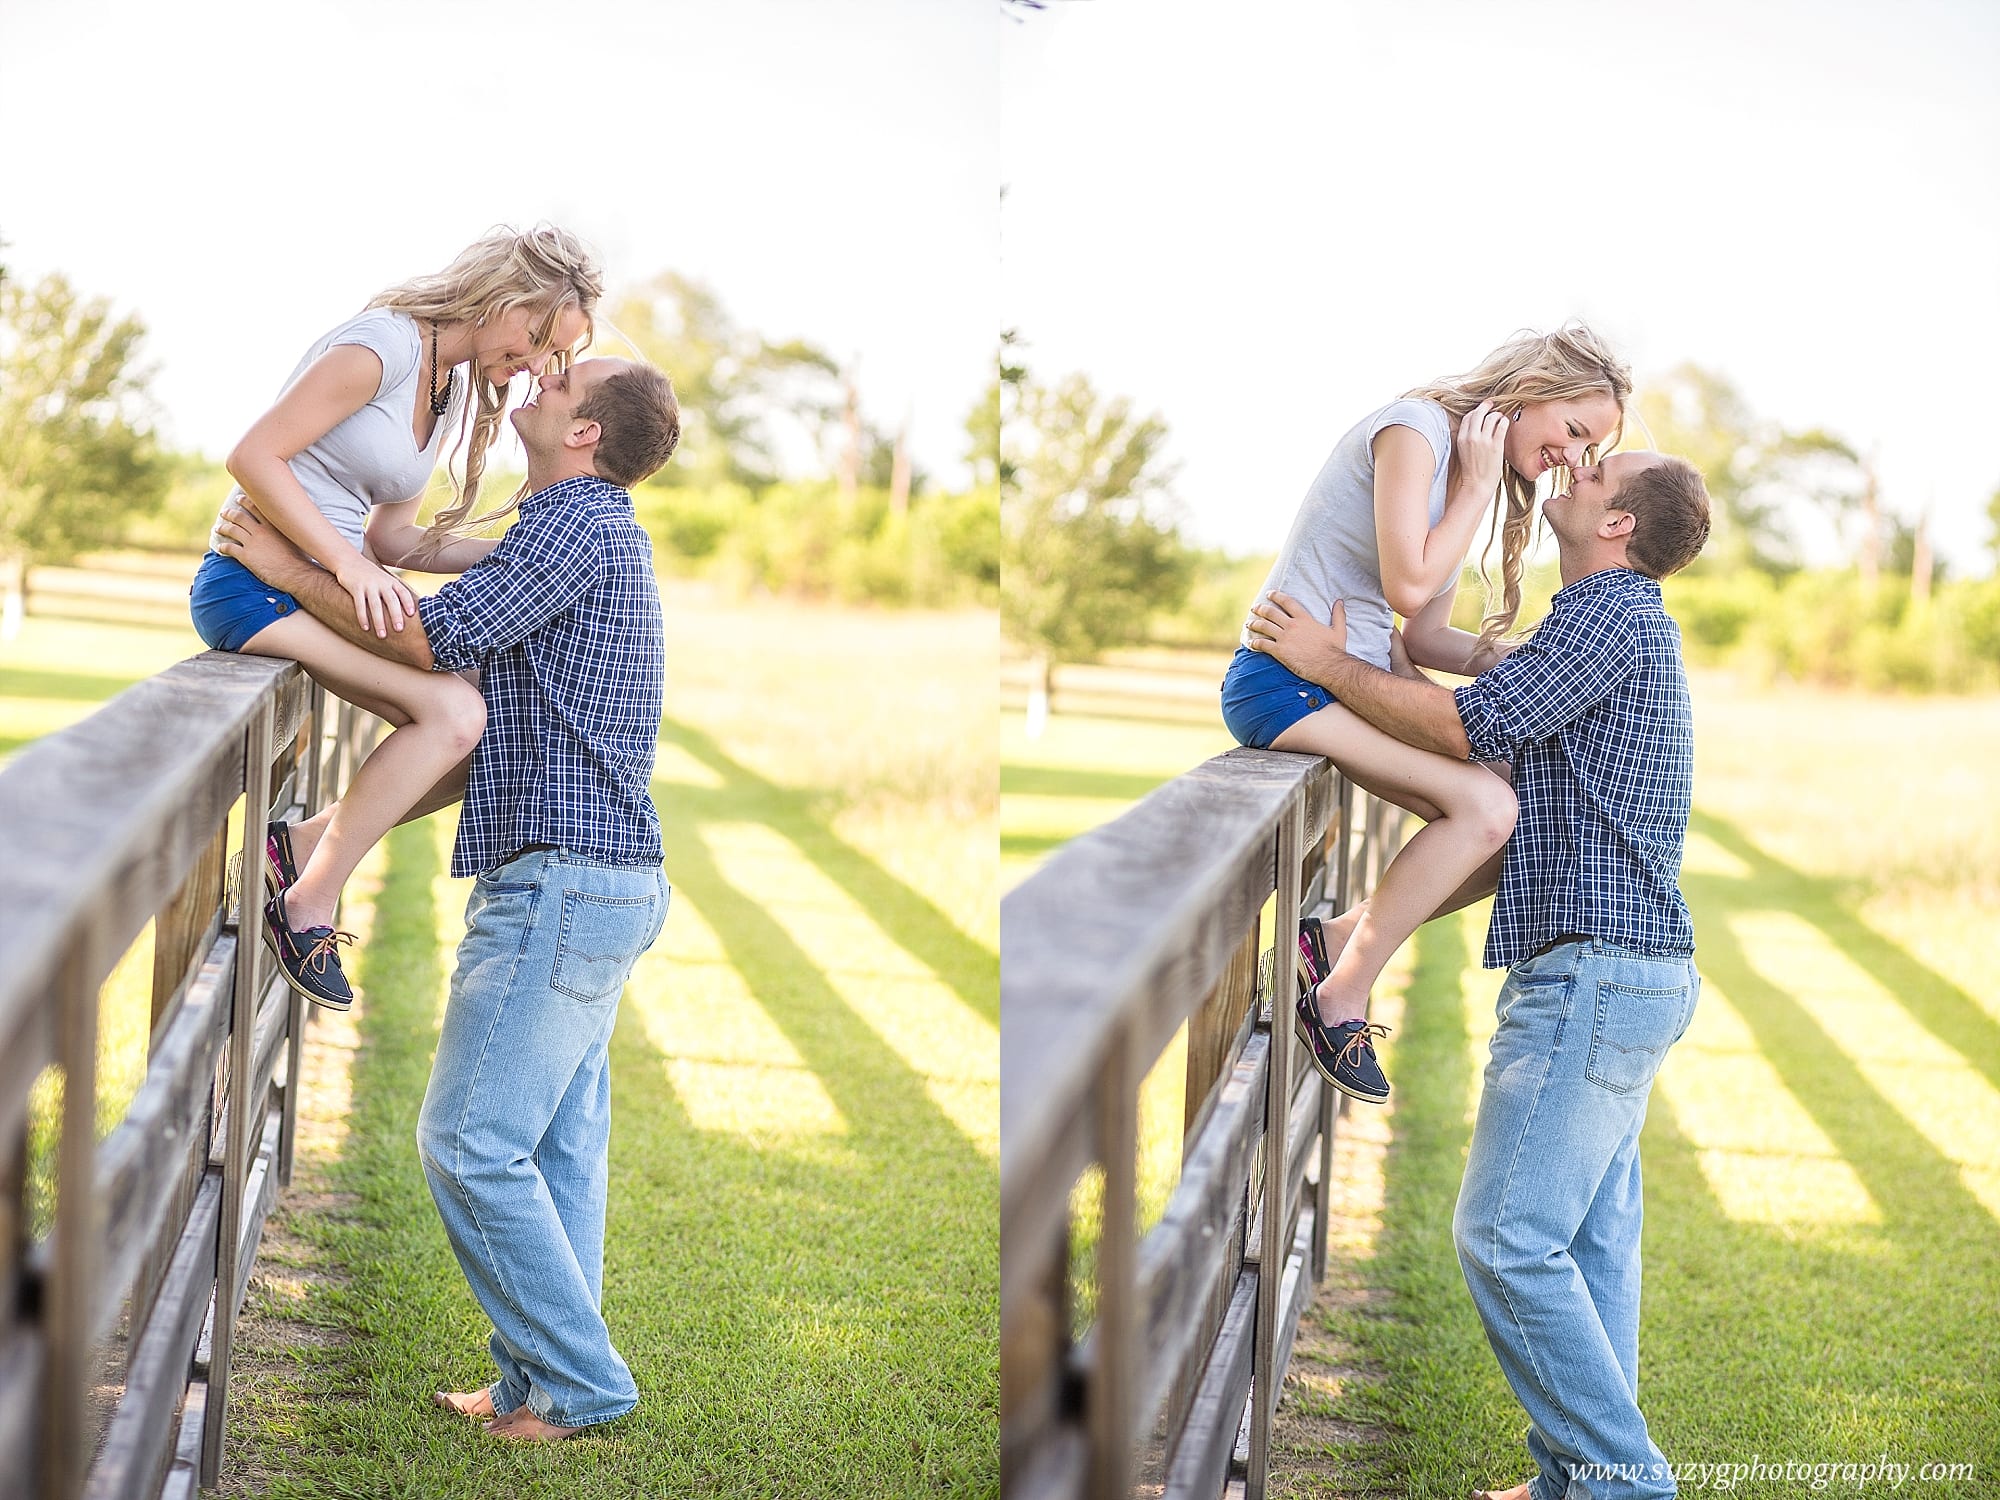 engagements-new orleans-texas-baton rouge-lake charles-suzy g-photography-suzygphotography_0022